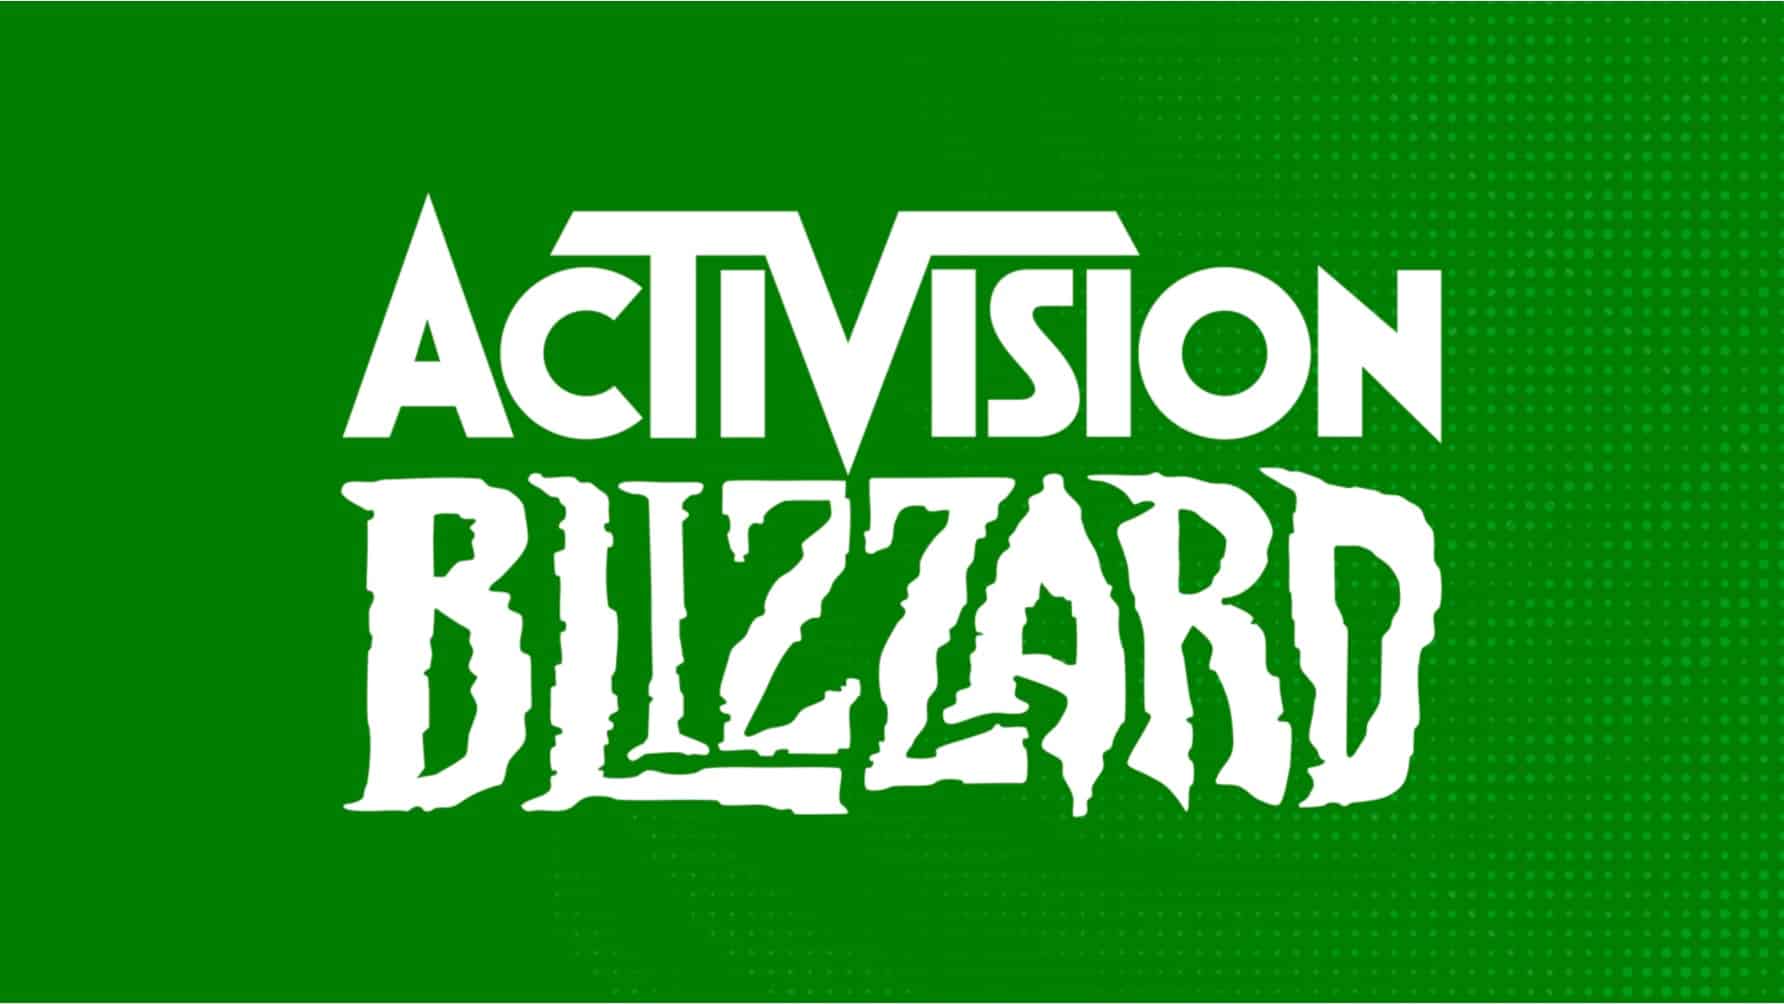 Activision Blizzard Has Harassment Problems, so Do Sony, Ubisoft,  -  Bloomberg